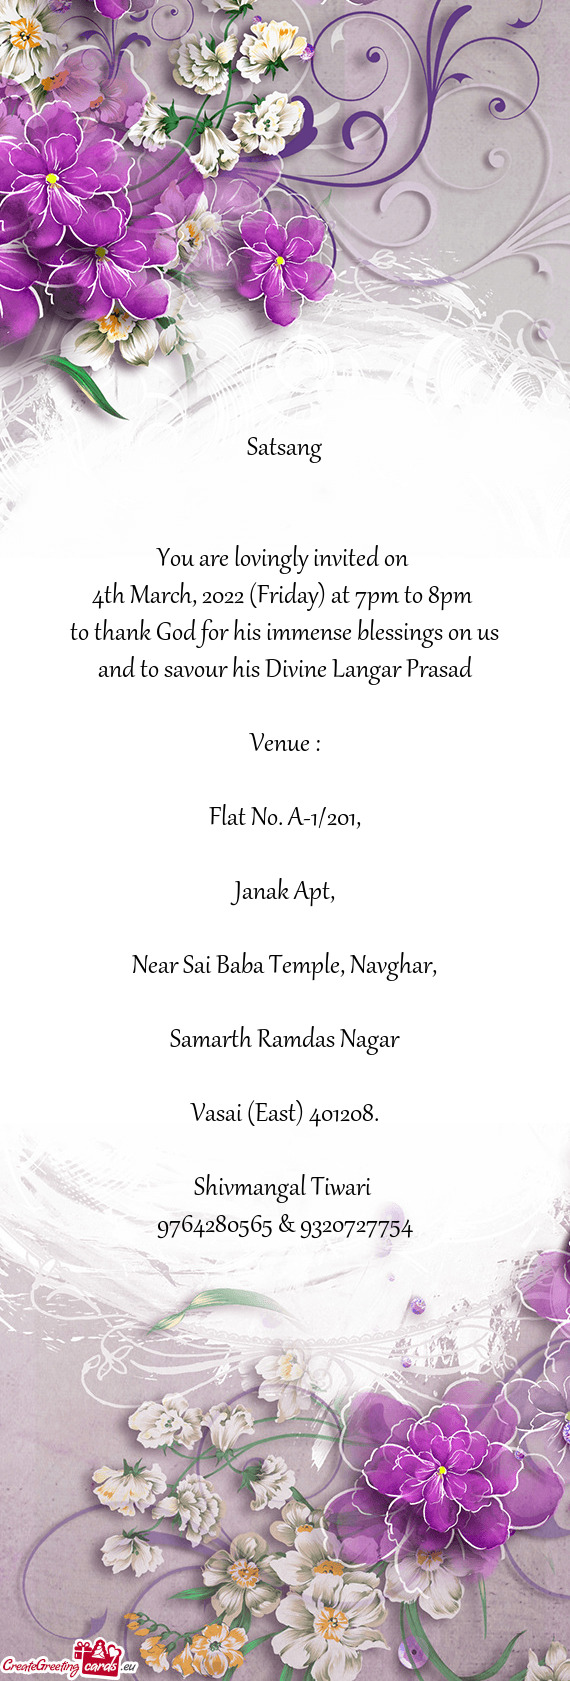 4th March, 2022 (Friday) at 7pm to 8pm